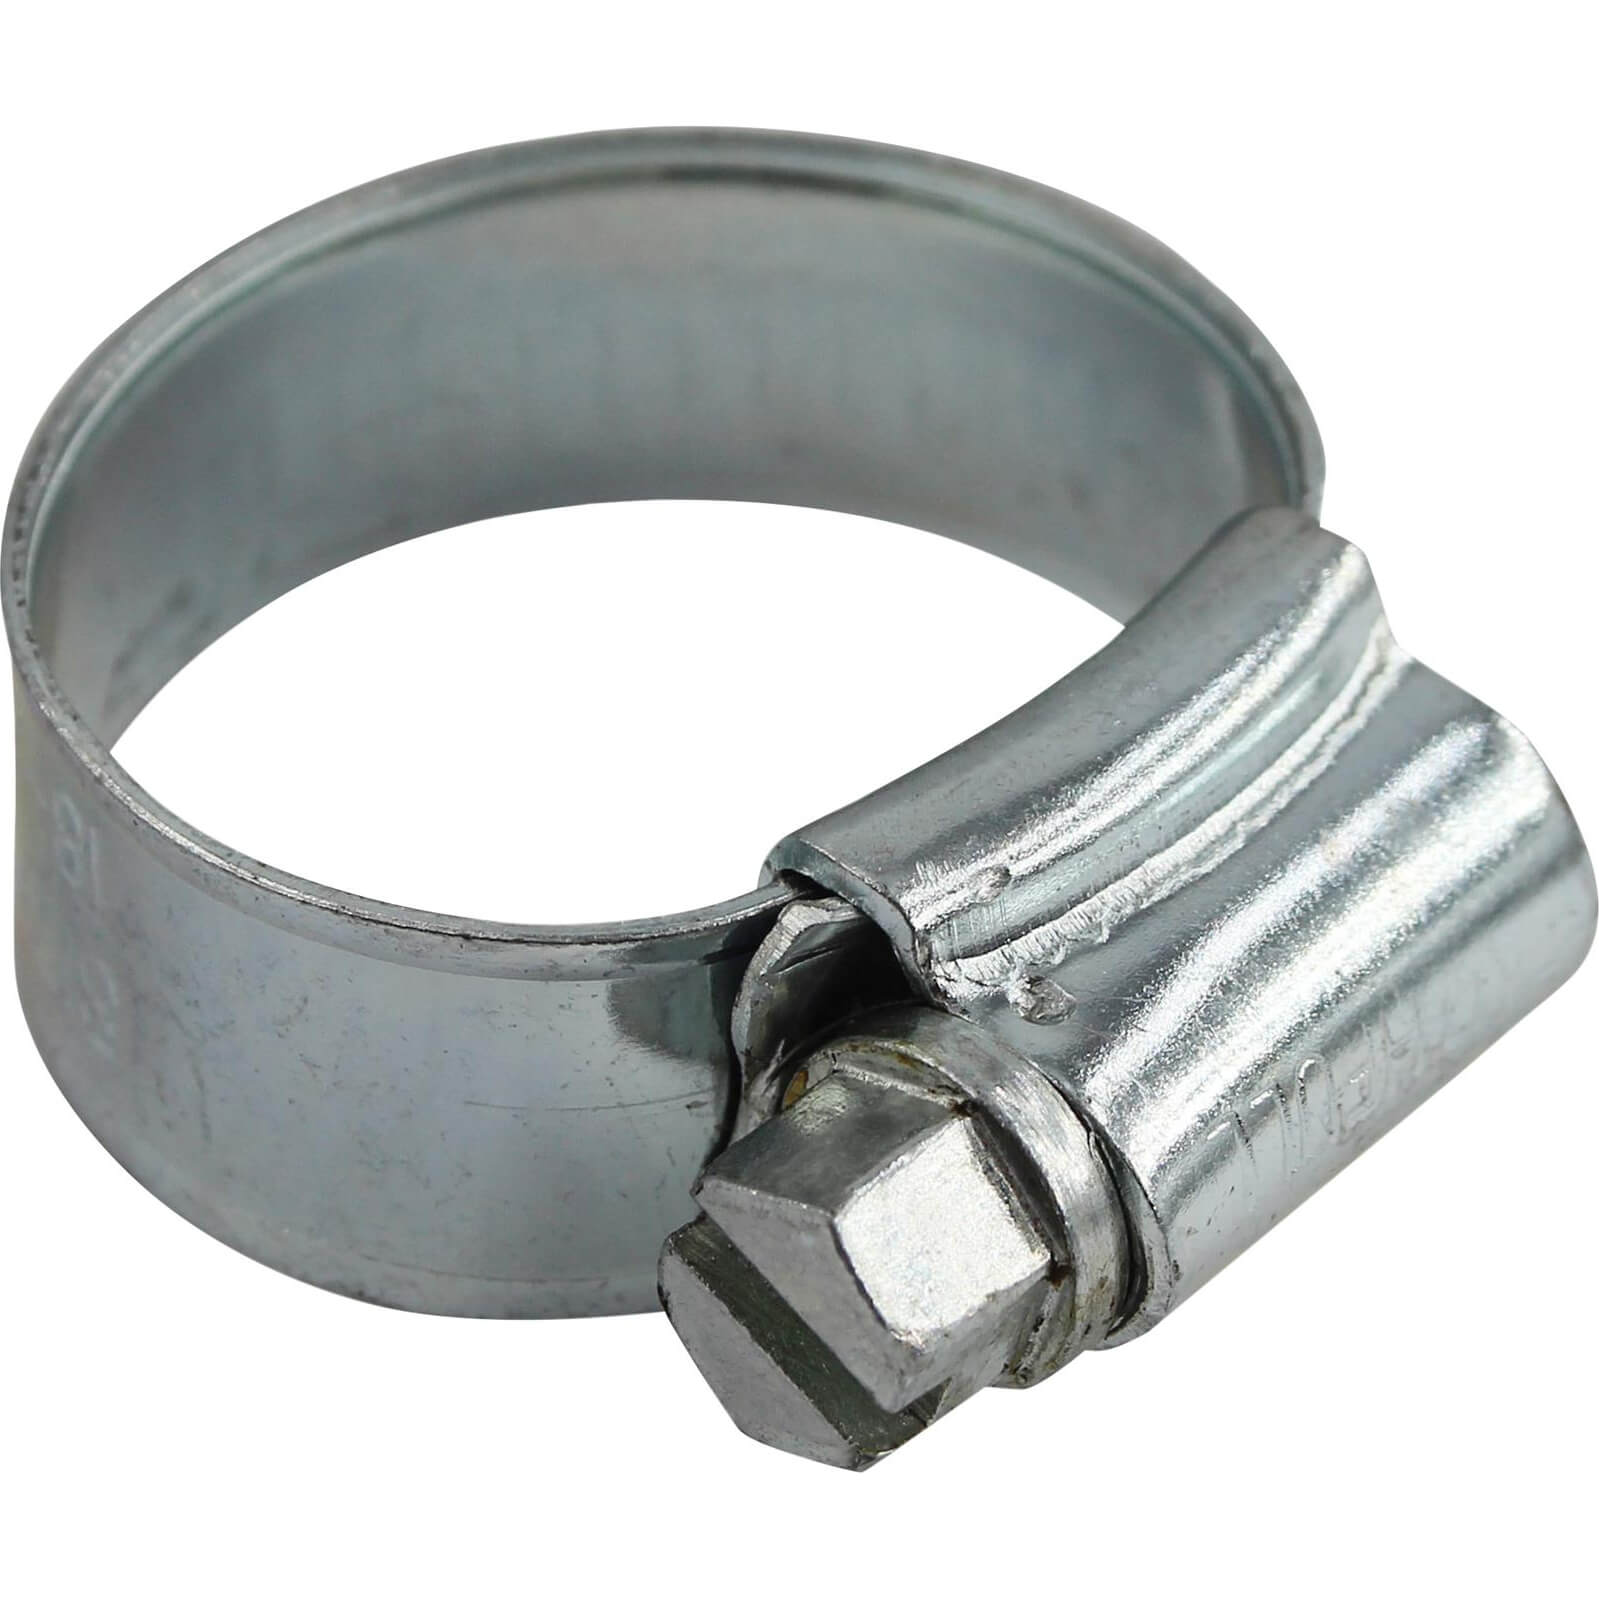 Image of Faithfull Zinc Plated Hose Clips 18mm - 25mm Pack of 1